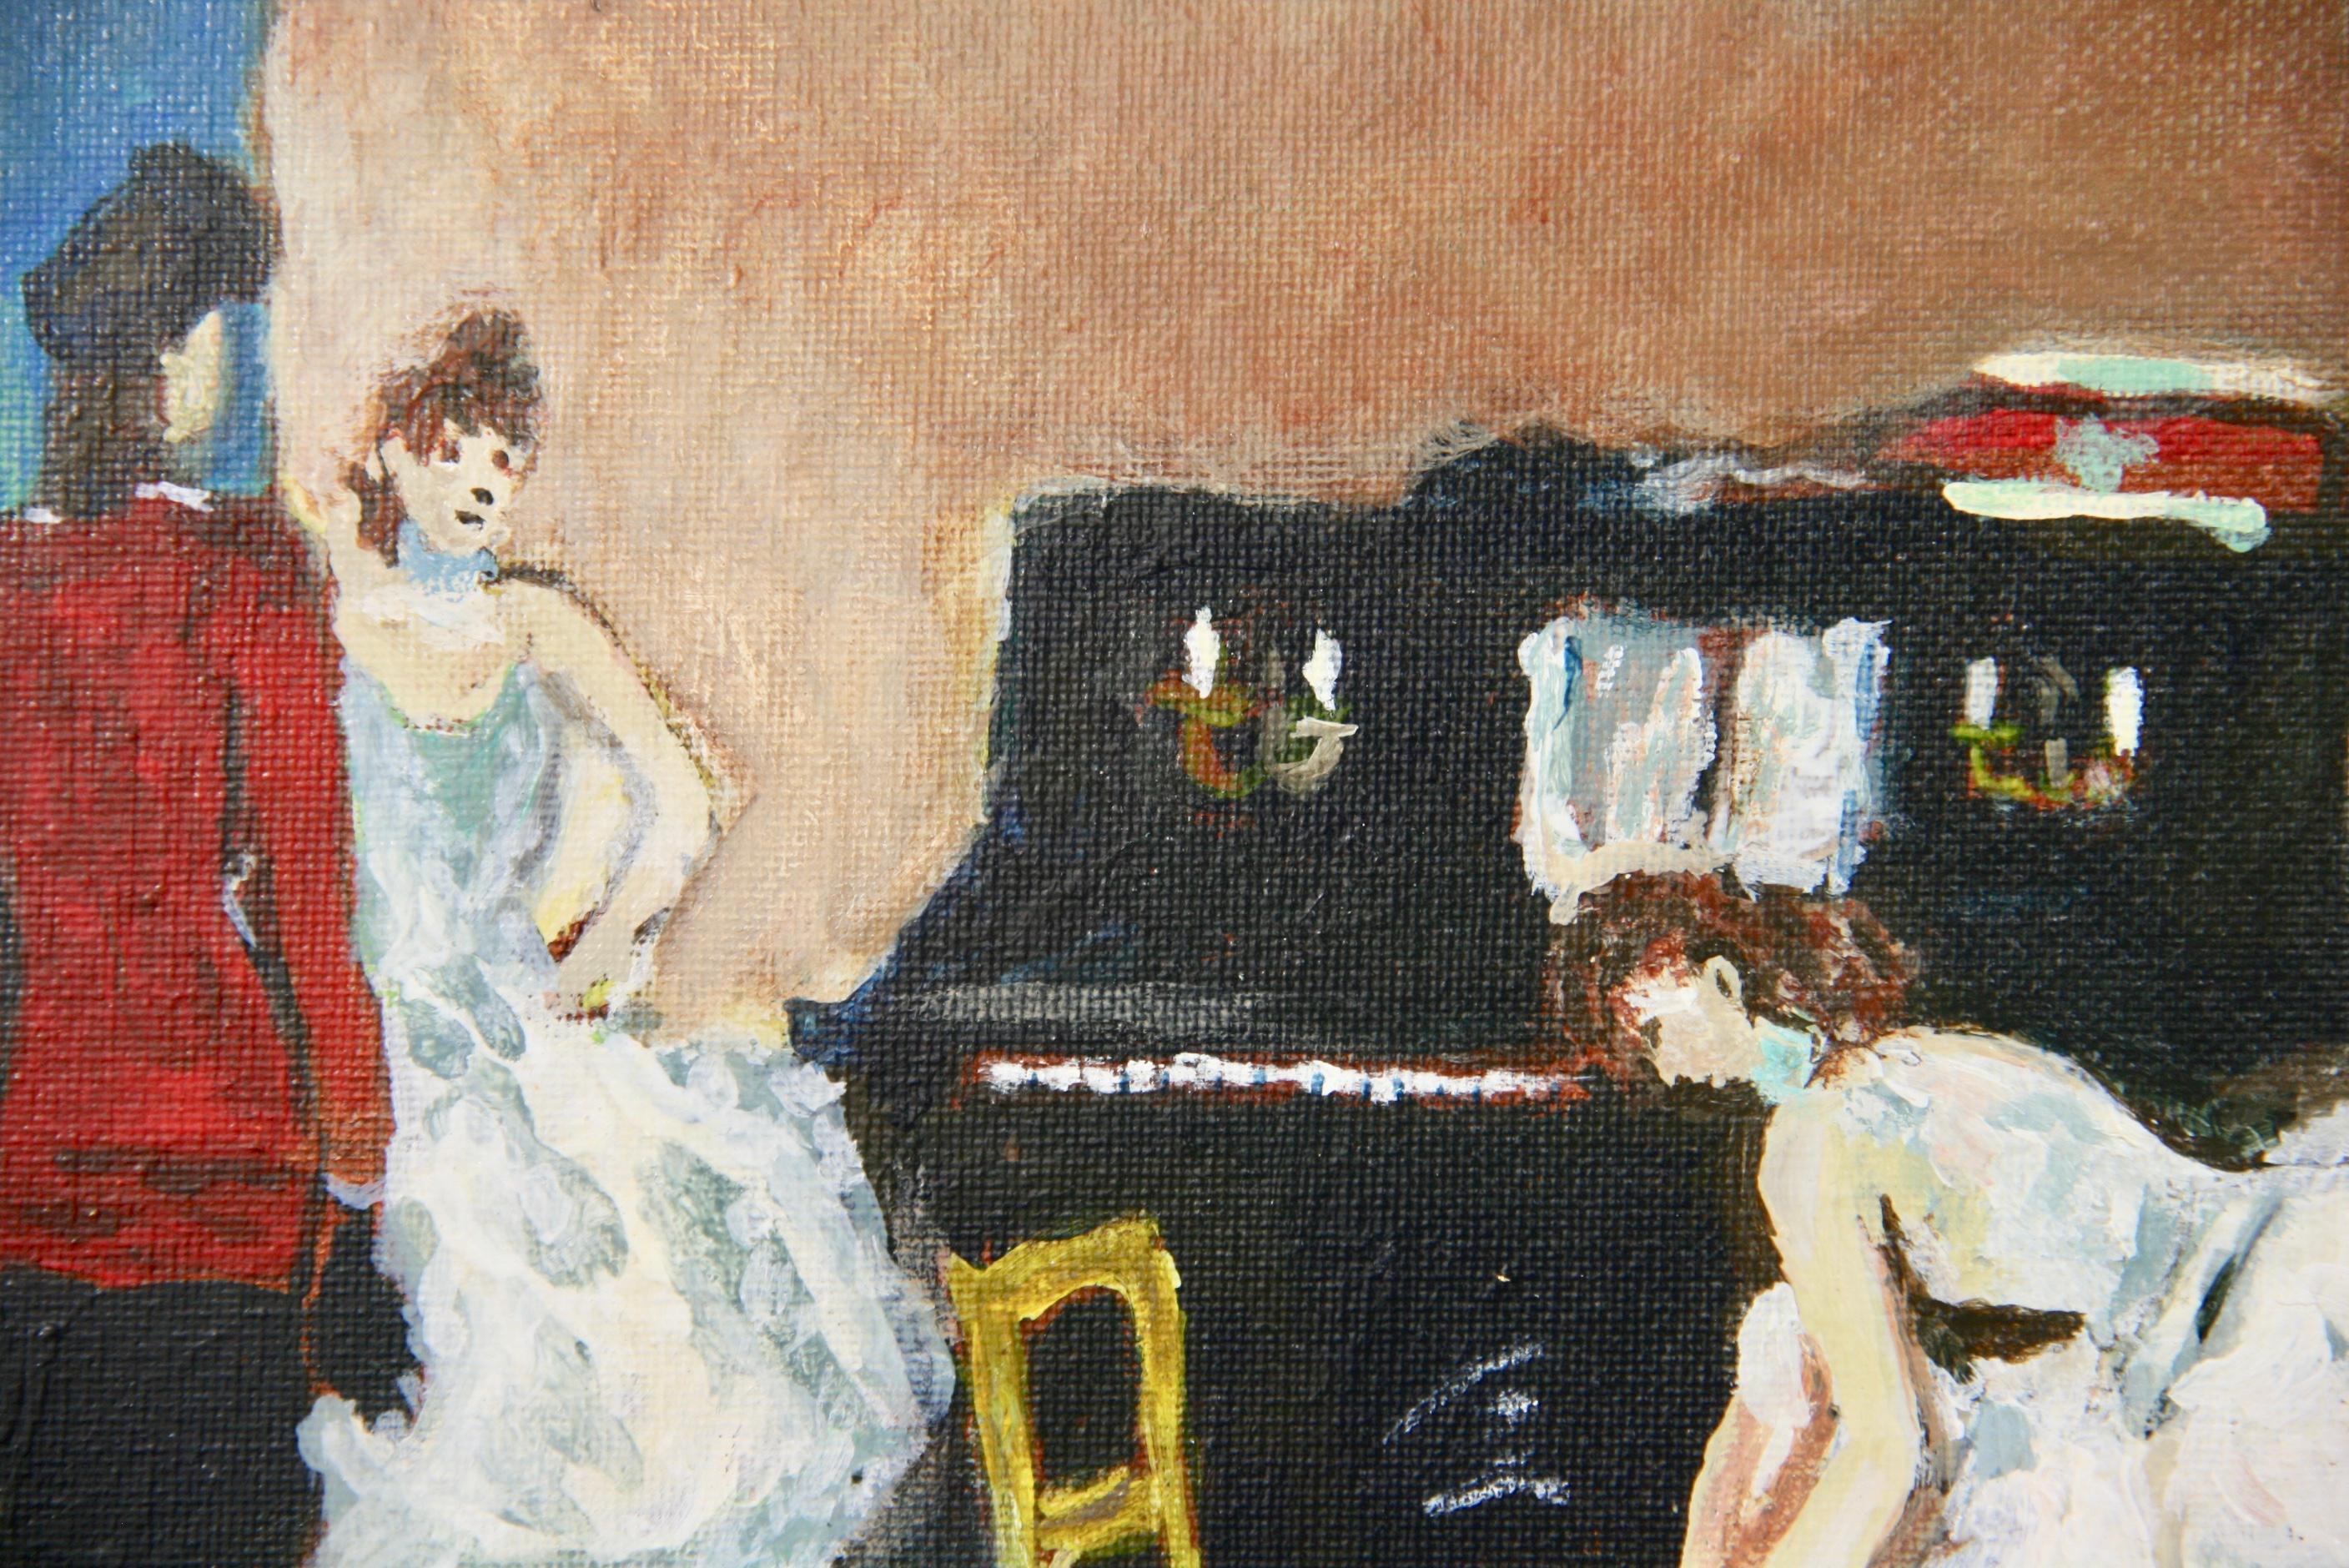 Antique Impressionist Female Figural Painting Back Stage At The Theater  4